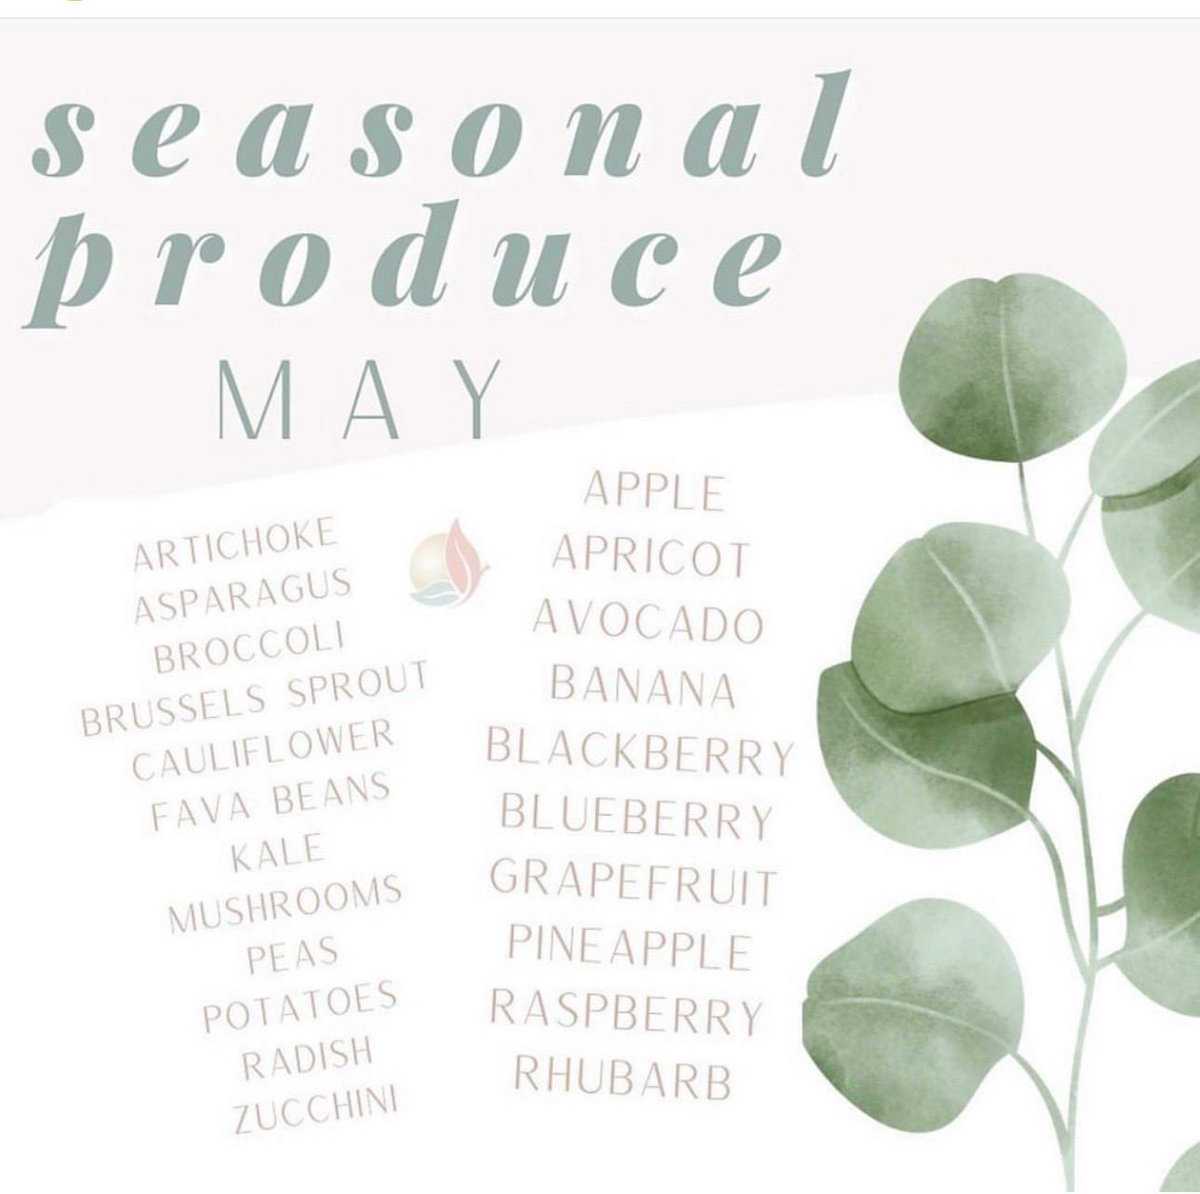 Here is the seasonal produce list for Southern California in May.

 #eattothrive #seasonalfoods #springfood  #foodlist #holisticeating #nutritiontip #nutritionadvice #thyroiddiet #hormonehealth #hormonebalance #naturaldiet